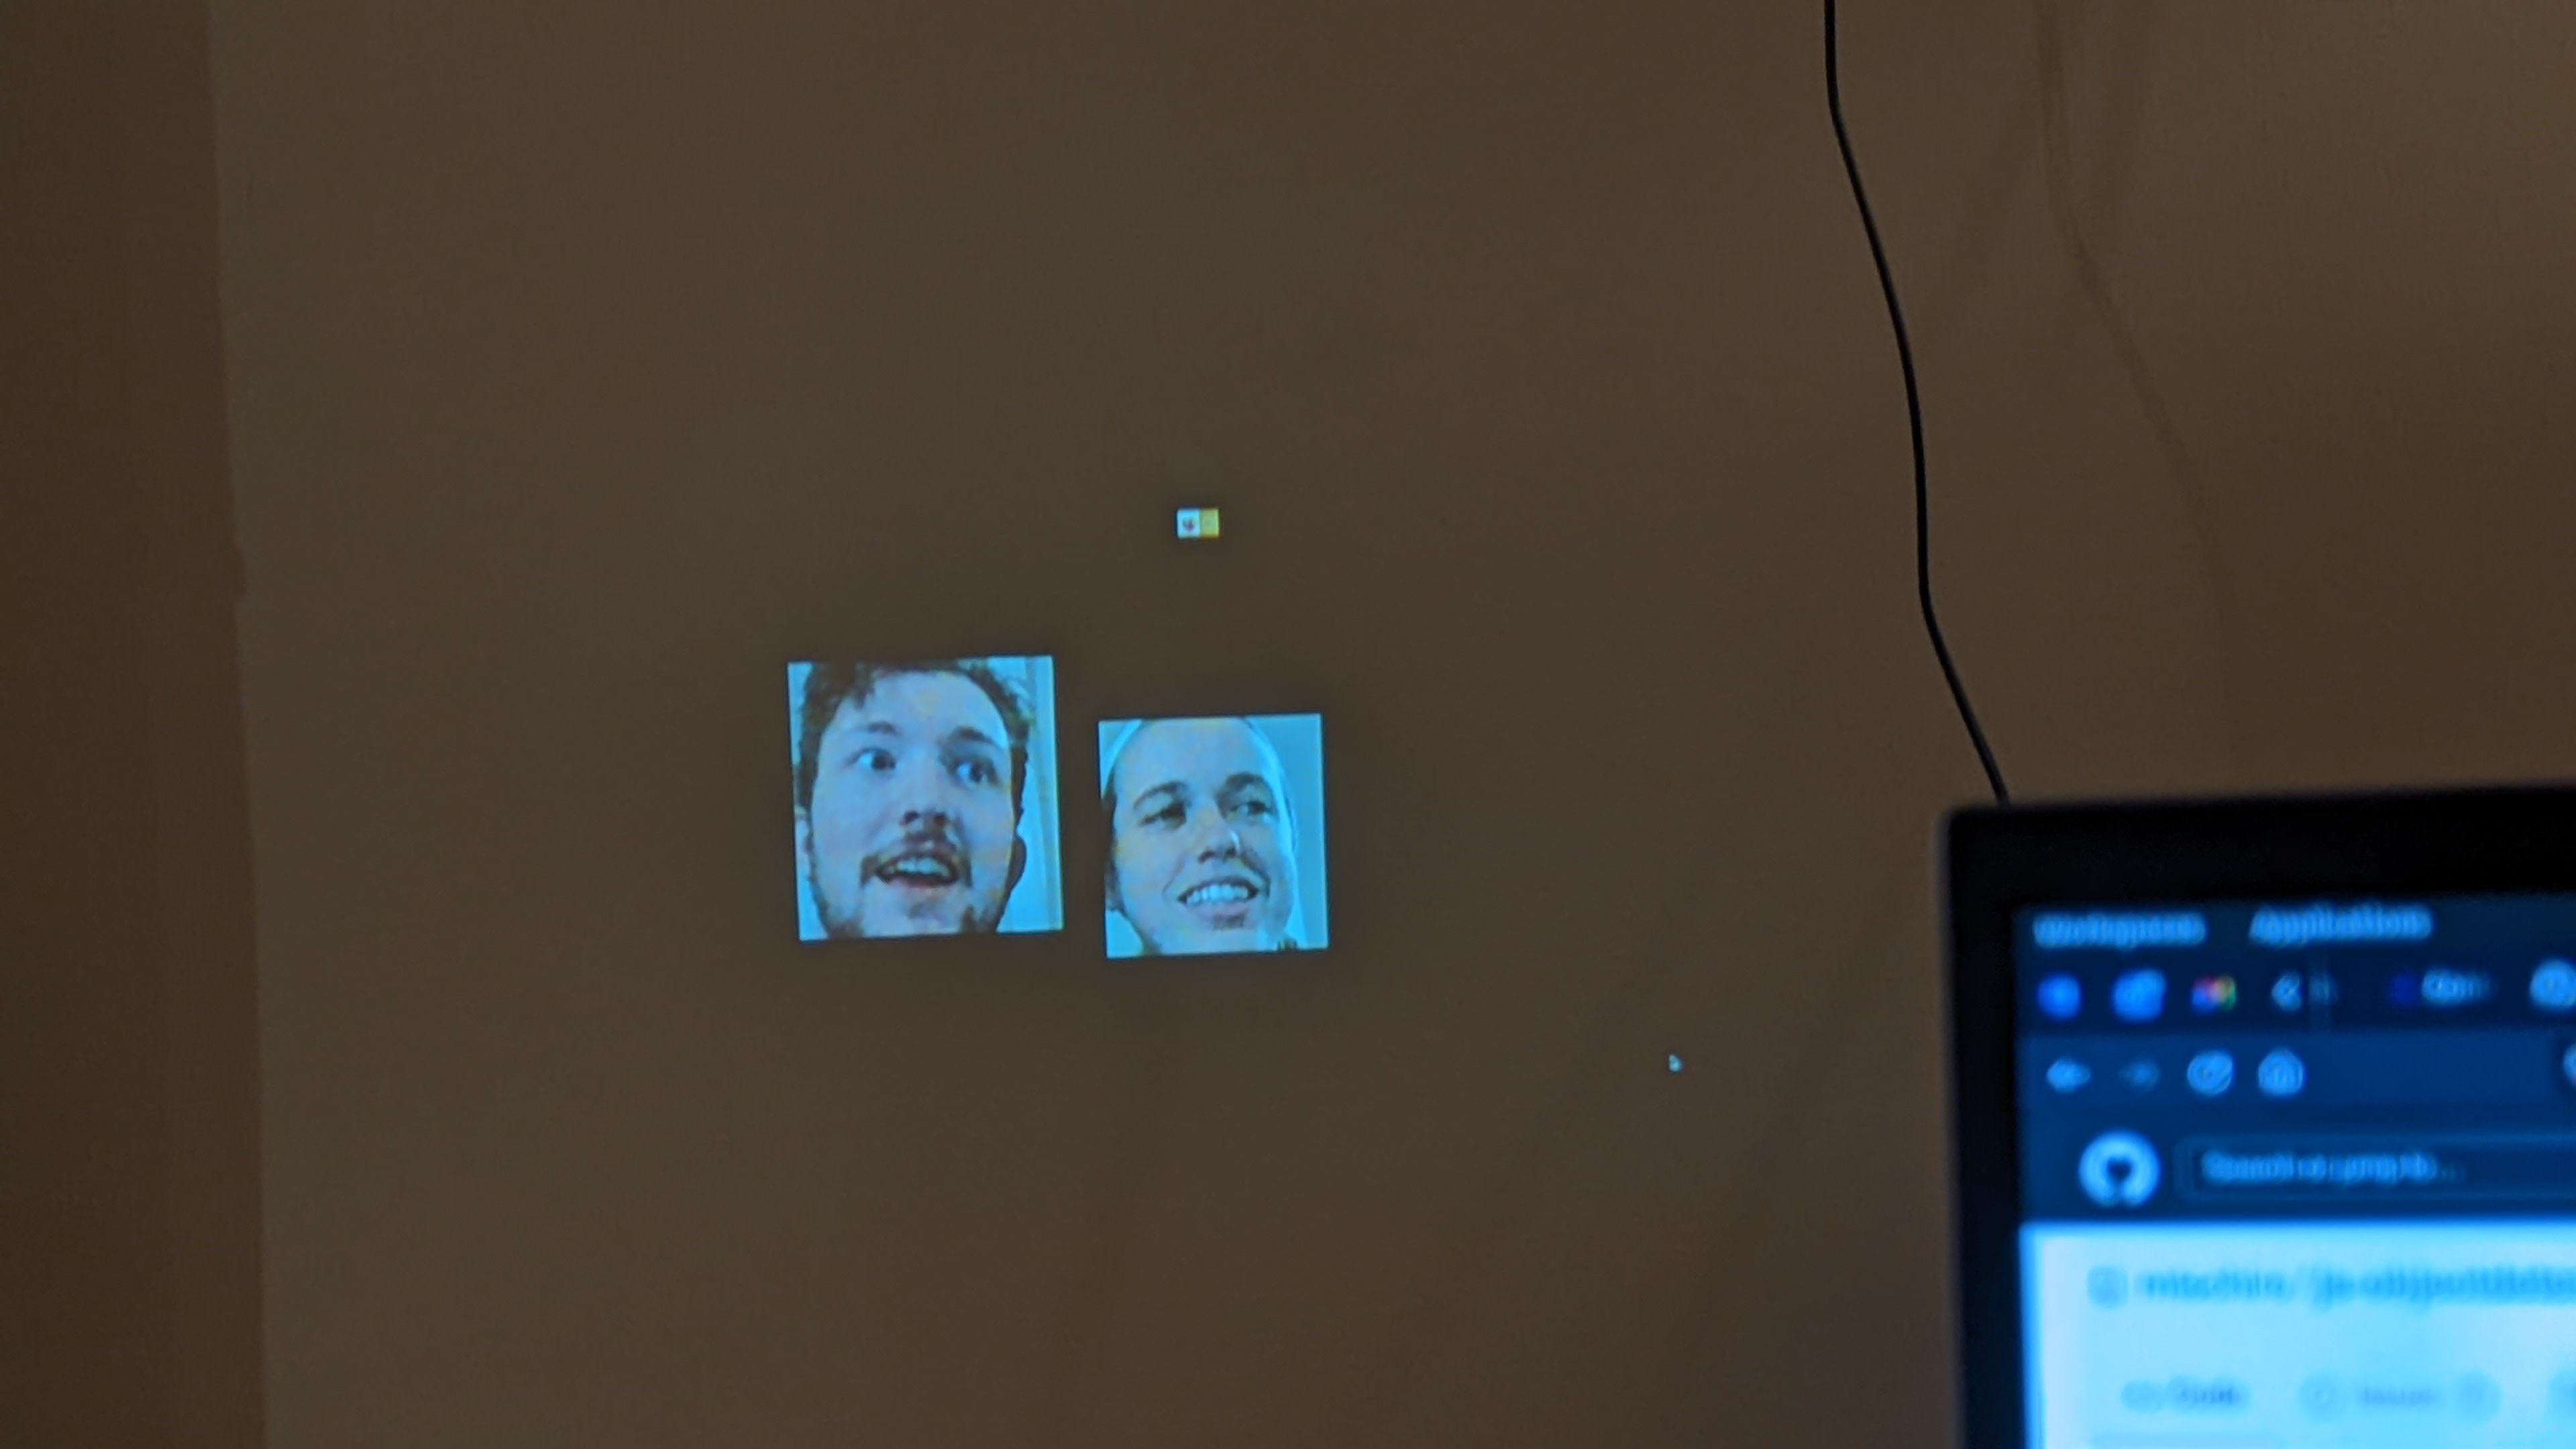 Ian & Emma's faces projected on the wall